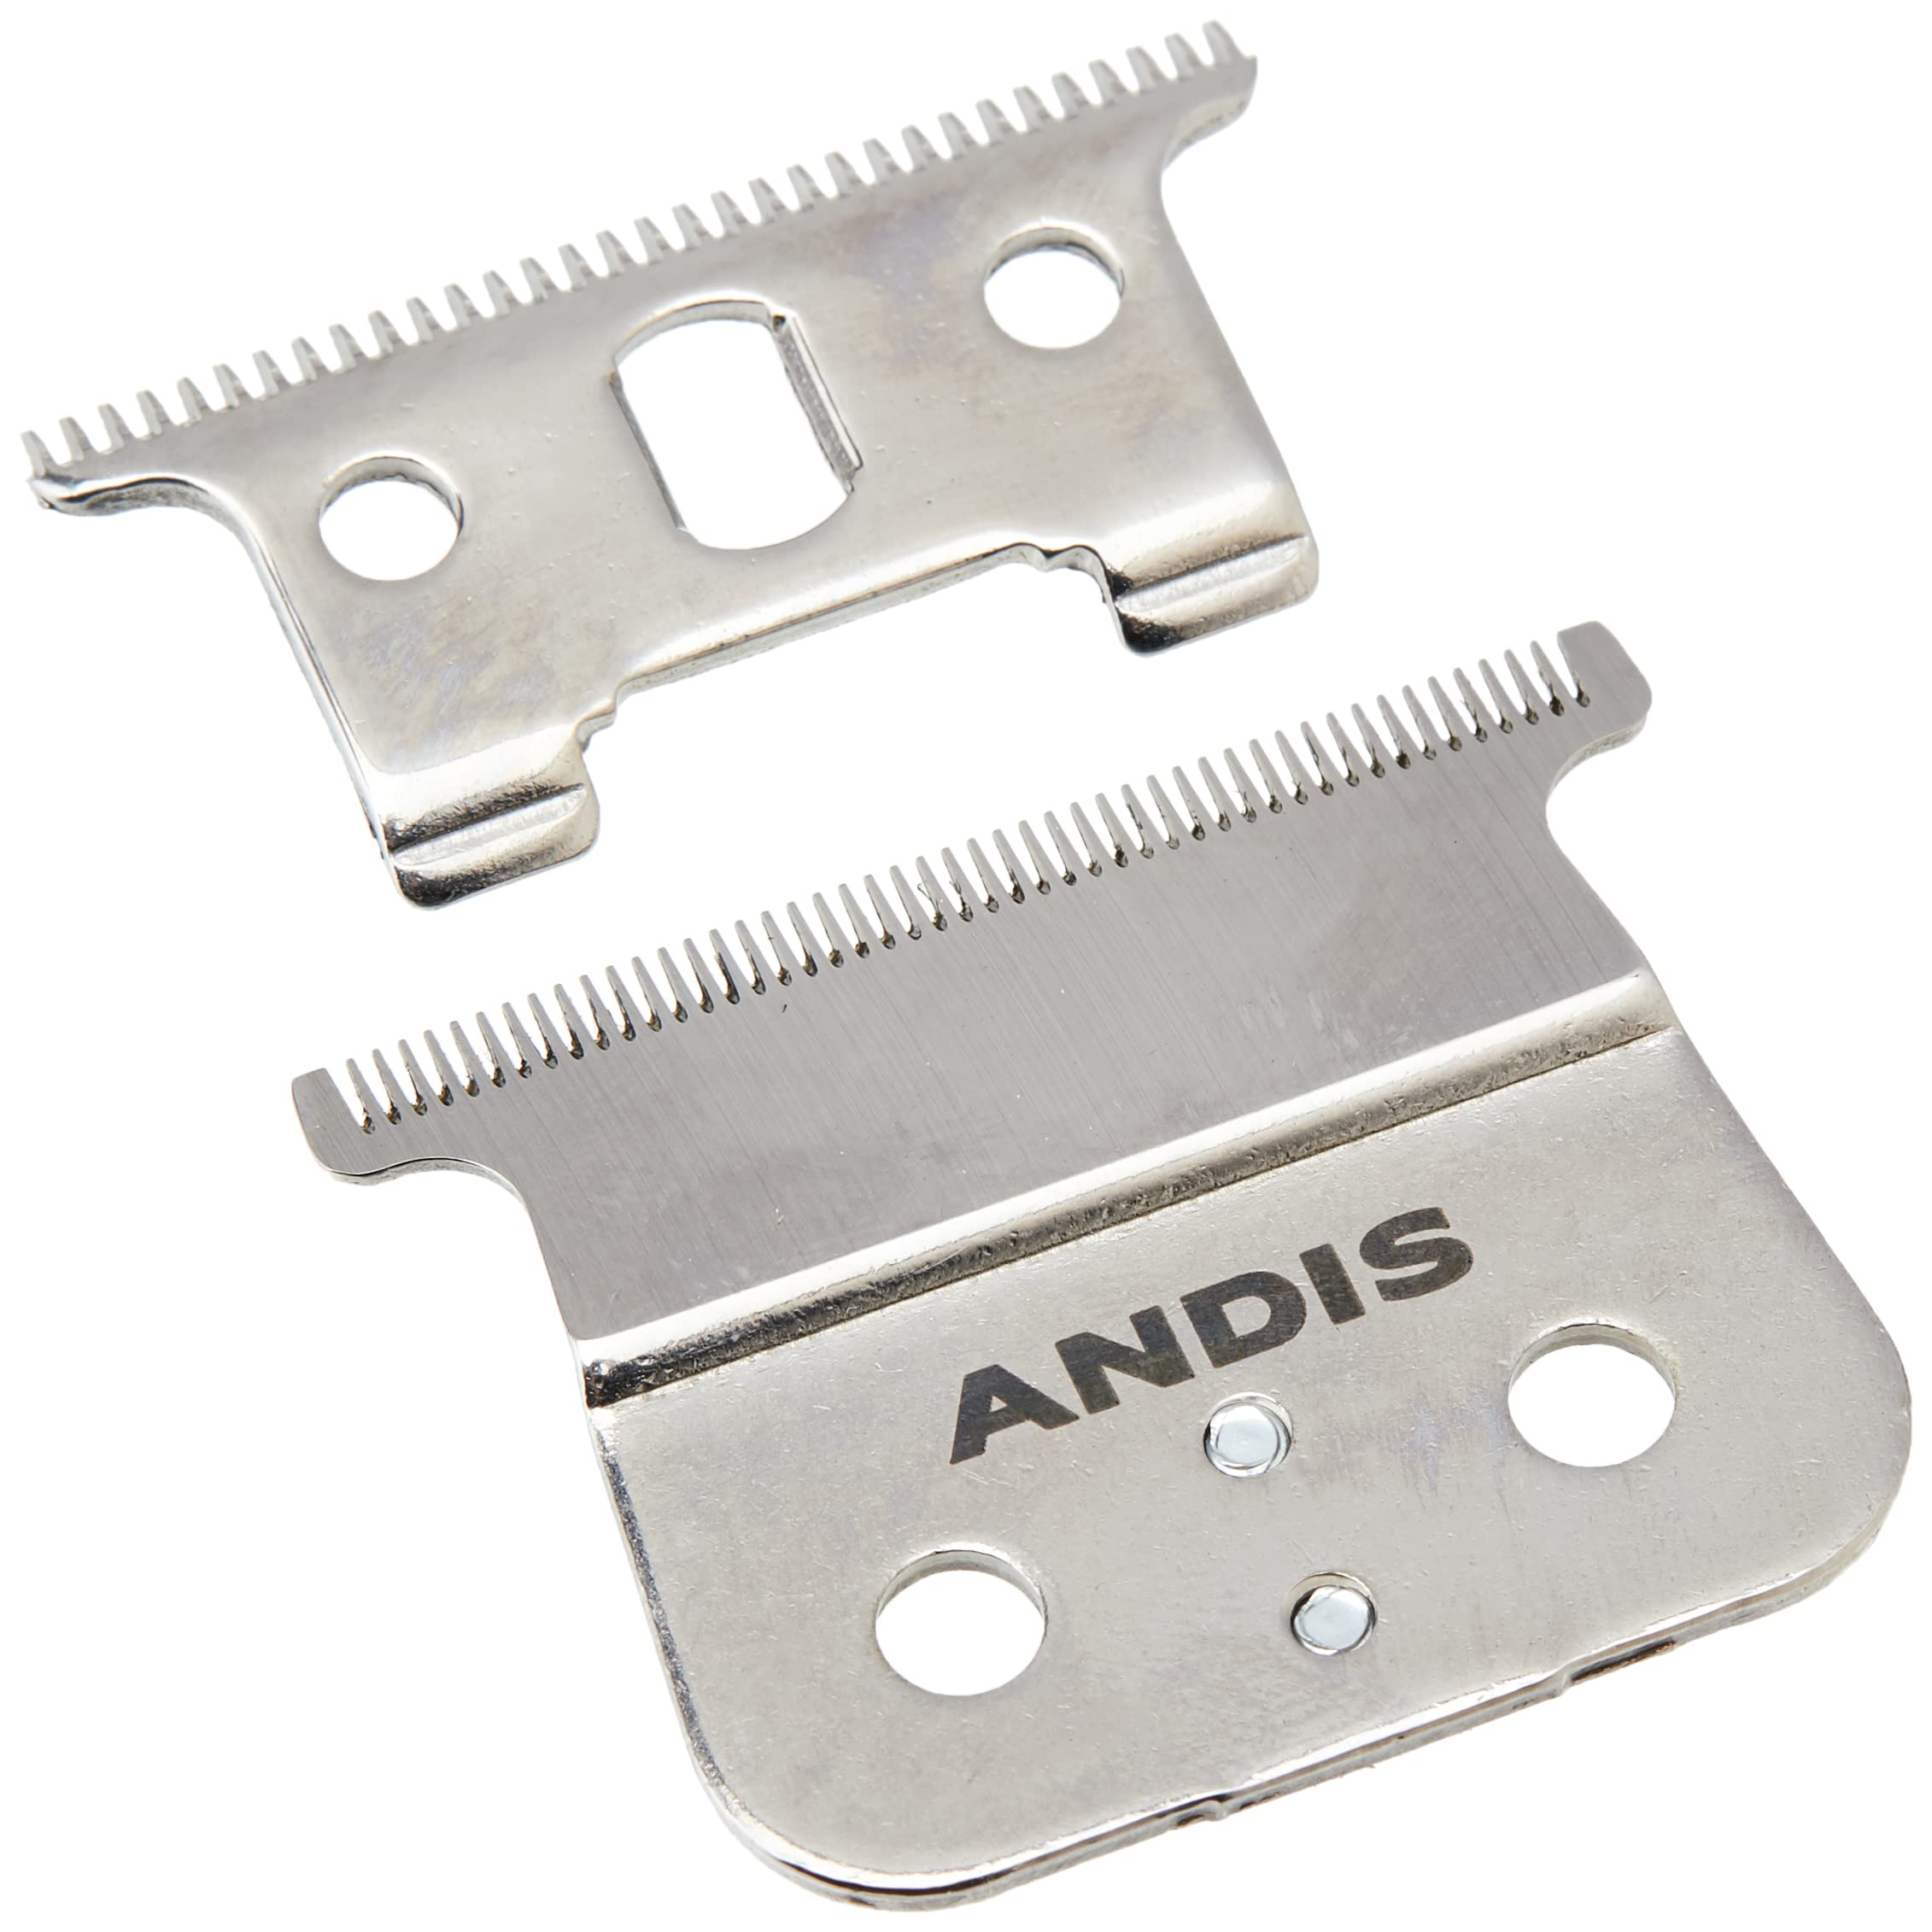 Andis 04850 GTX T-Outliner Stainless Steel Deep Tooth Replacement Blade for Trimmer, Carbon Steel Comfort Edge Blade - Zero Gapped - Polished (Pack of 1)